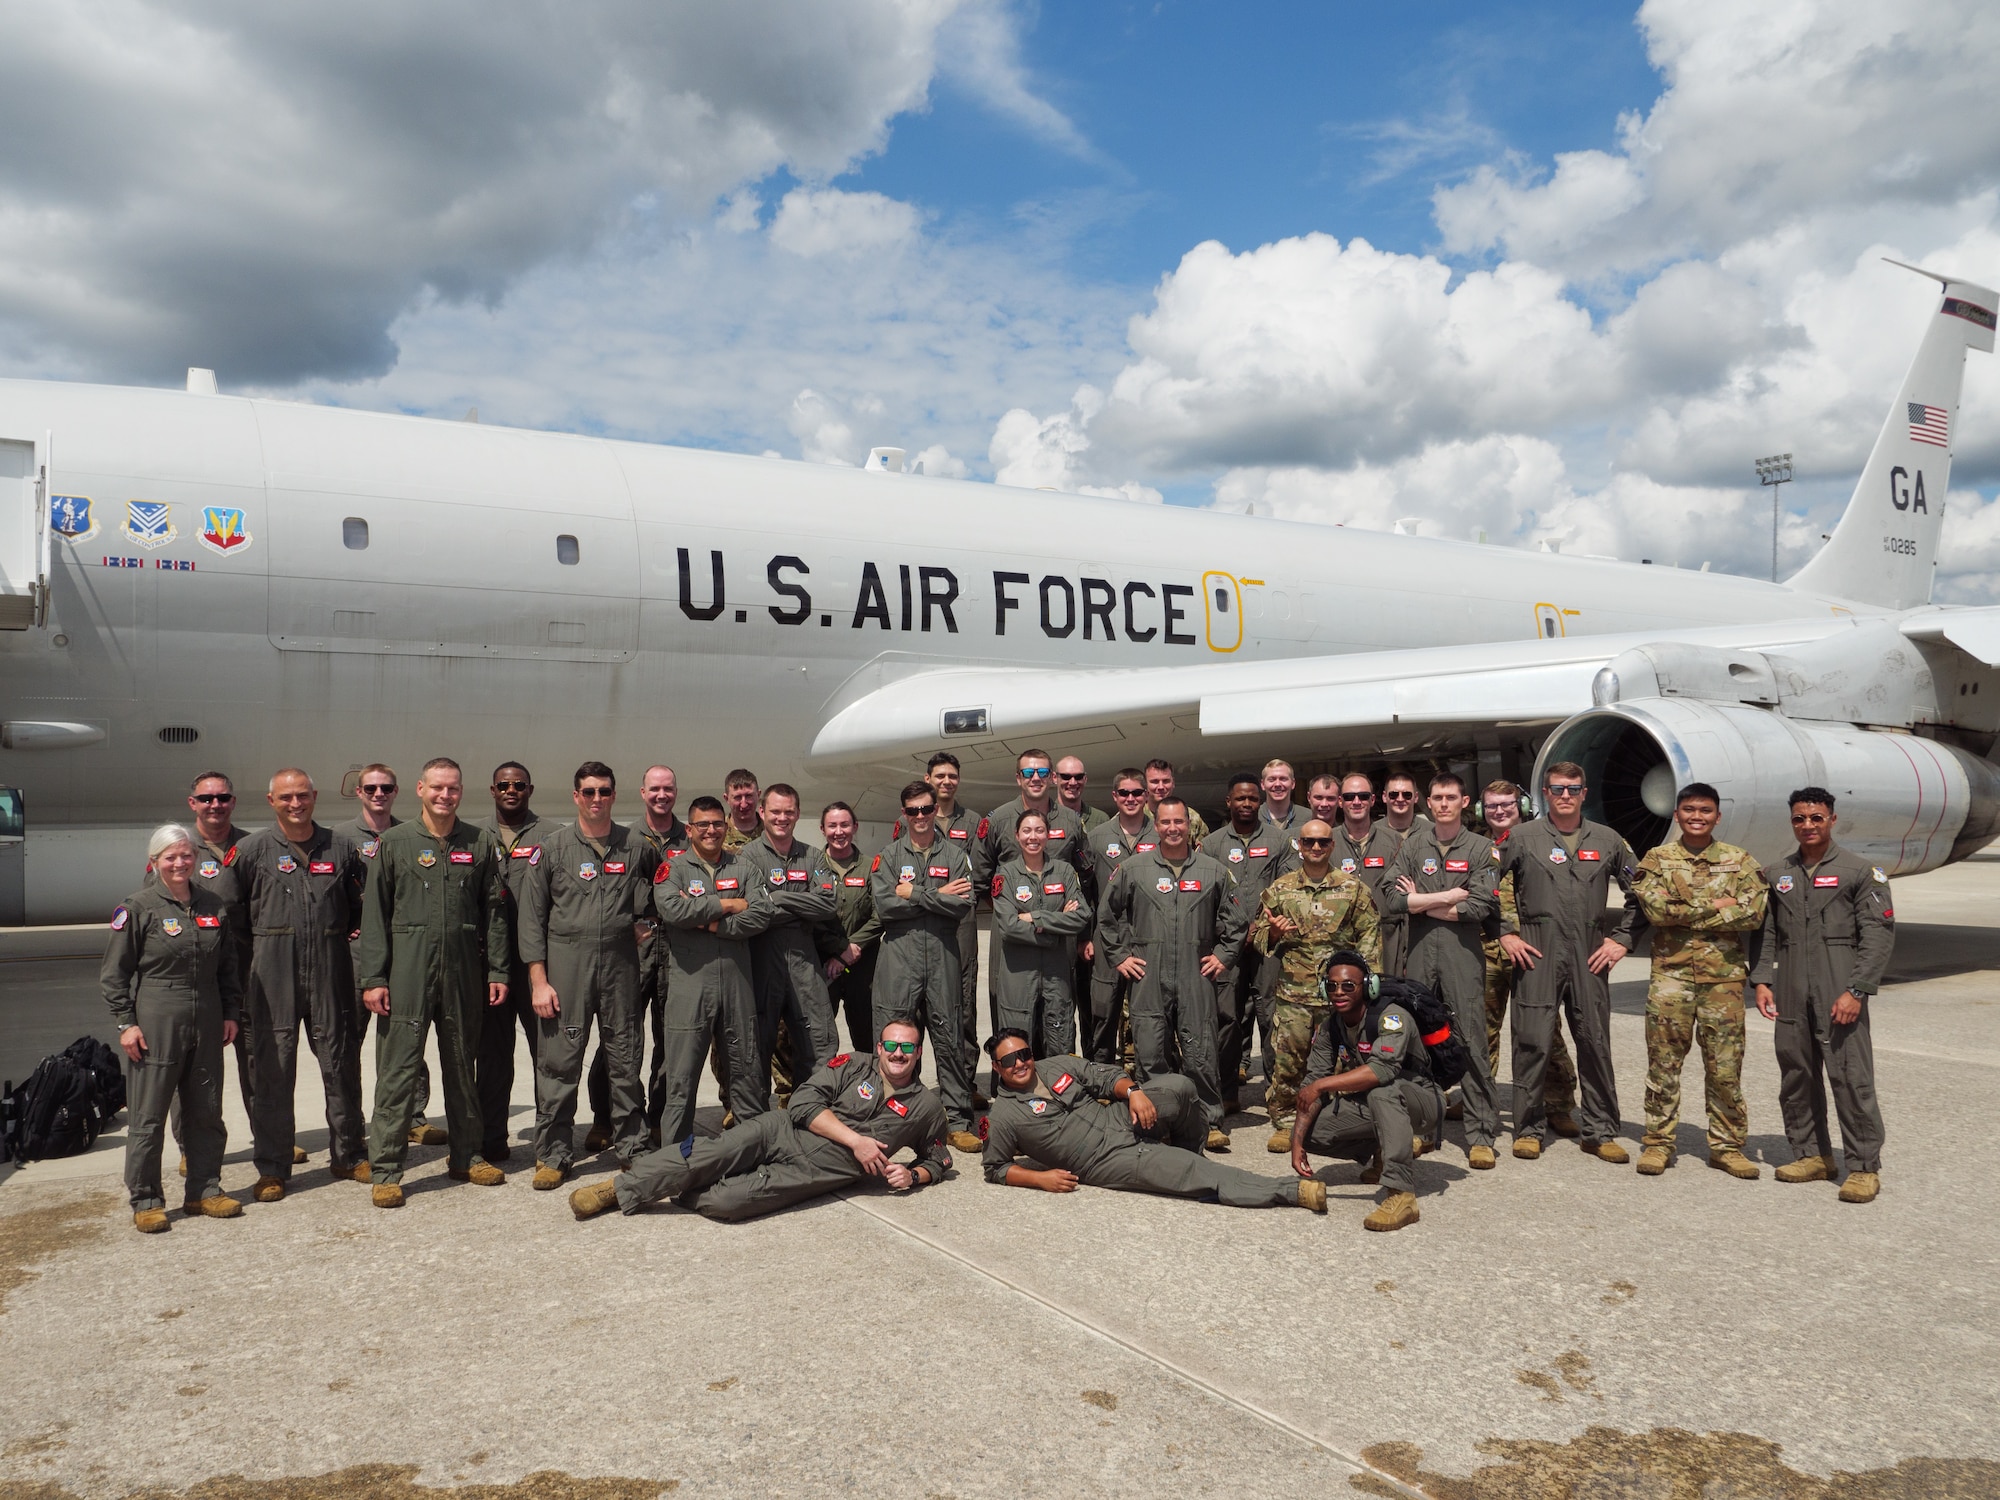 Photo shows group of Airmen standing in front of plane for photo